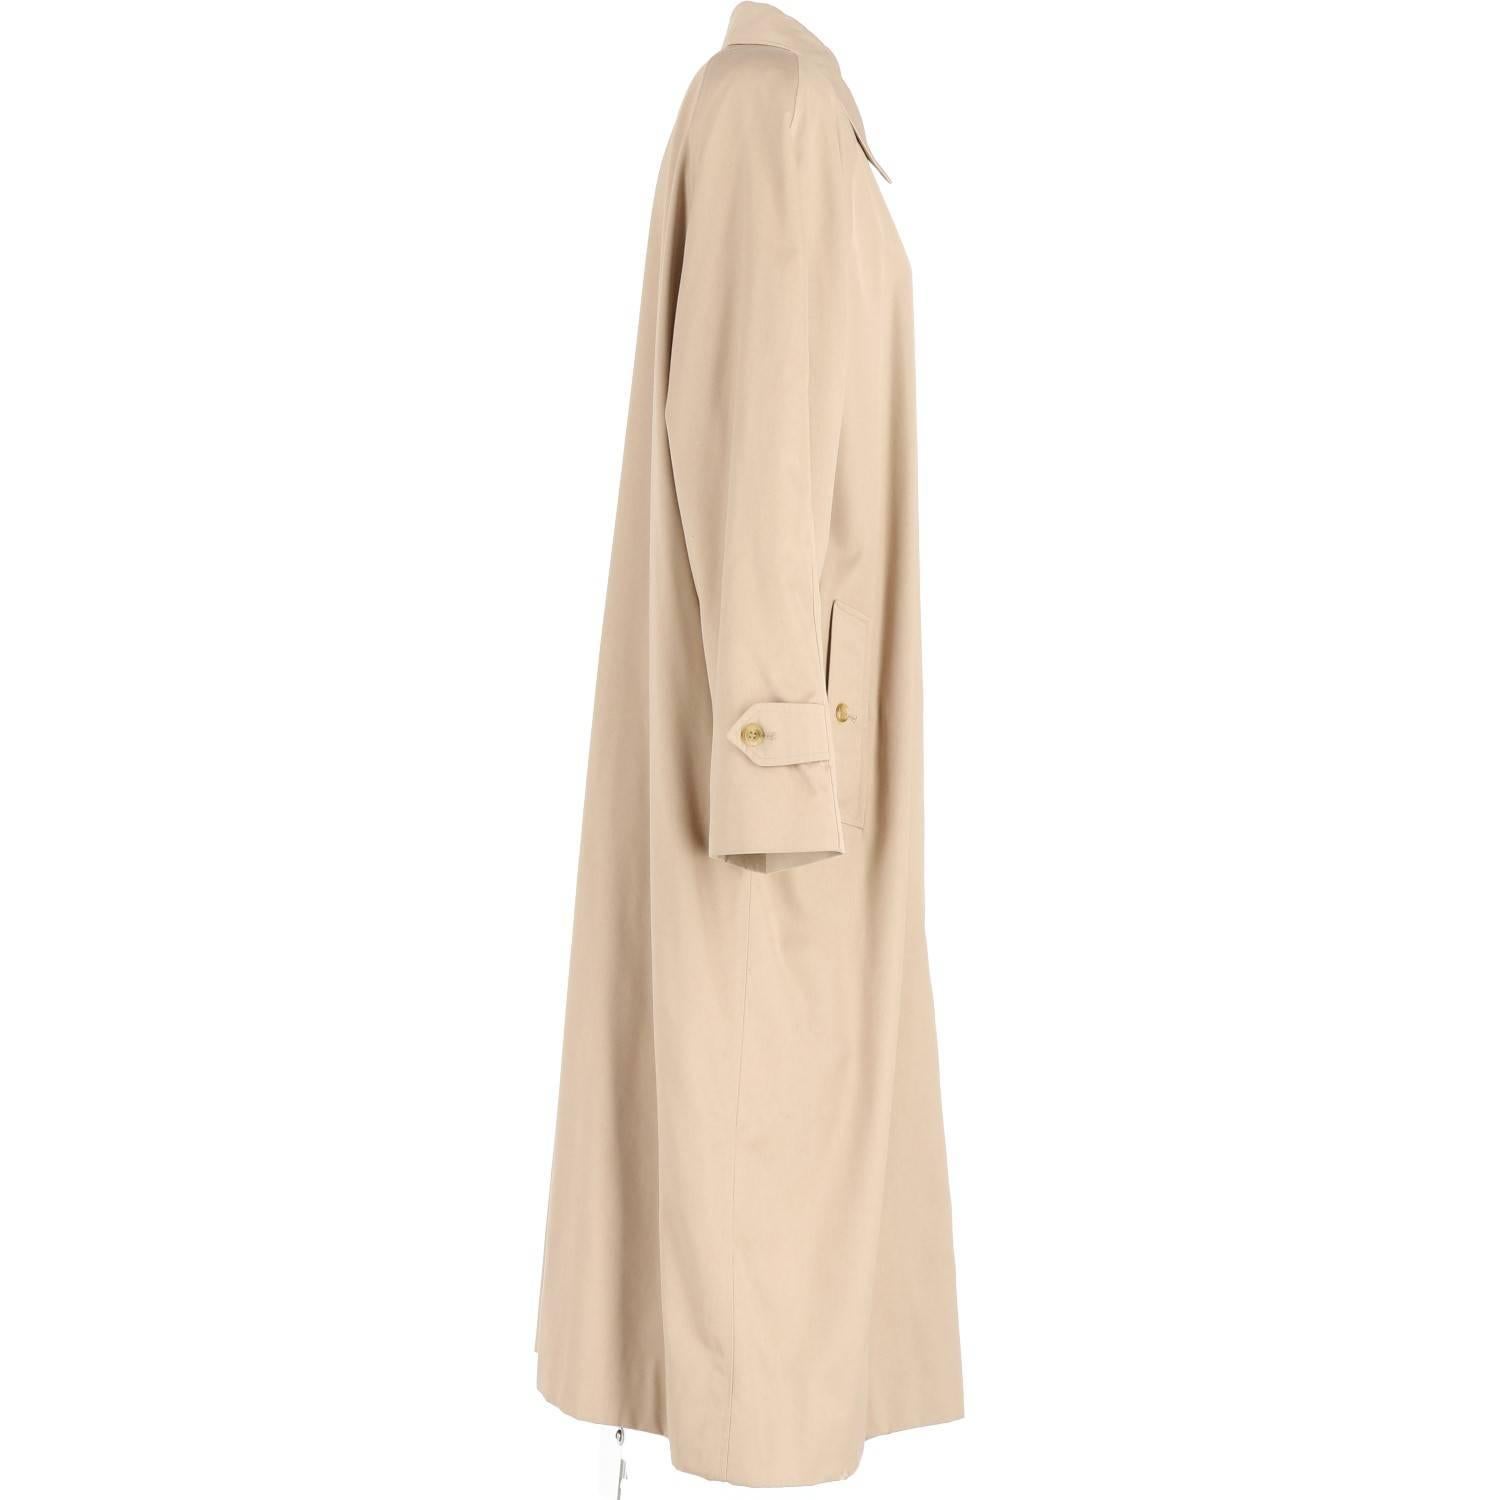 Classic Burberry beige overcoat in blend cotton, lined in iconic tartan fabric. Frontal buttons closure. The item was produced in the 80s and in in excellent conditions. 

Size: IT 52 

Height: 120 cm 
Bust: 74 cm 
Raglan sleeve: 75 cm